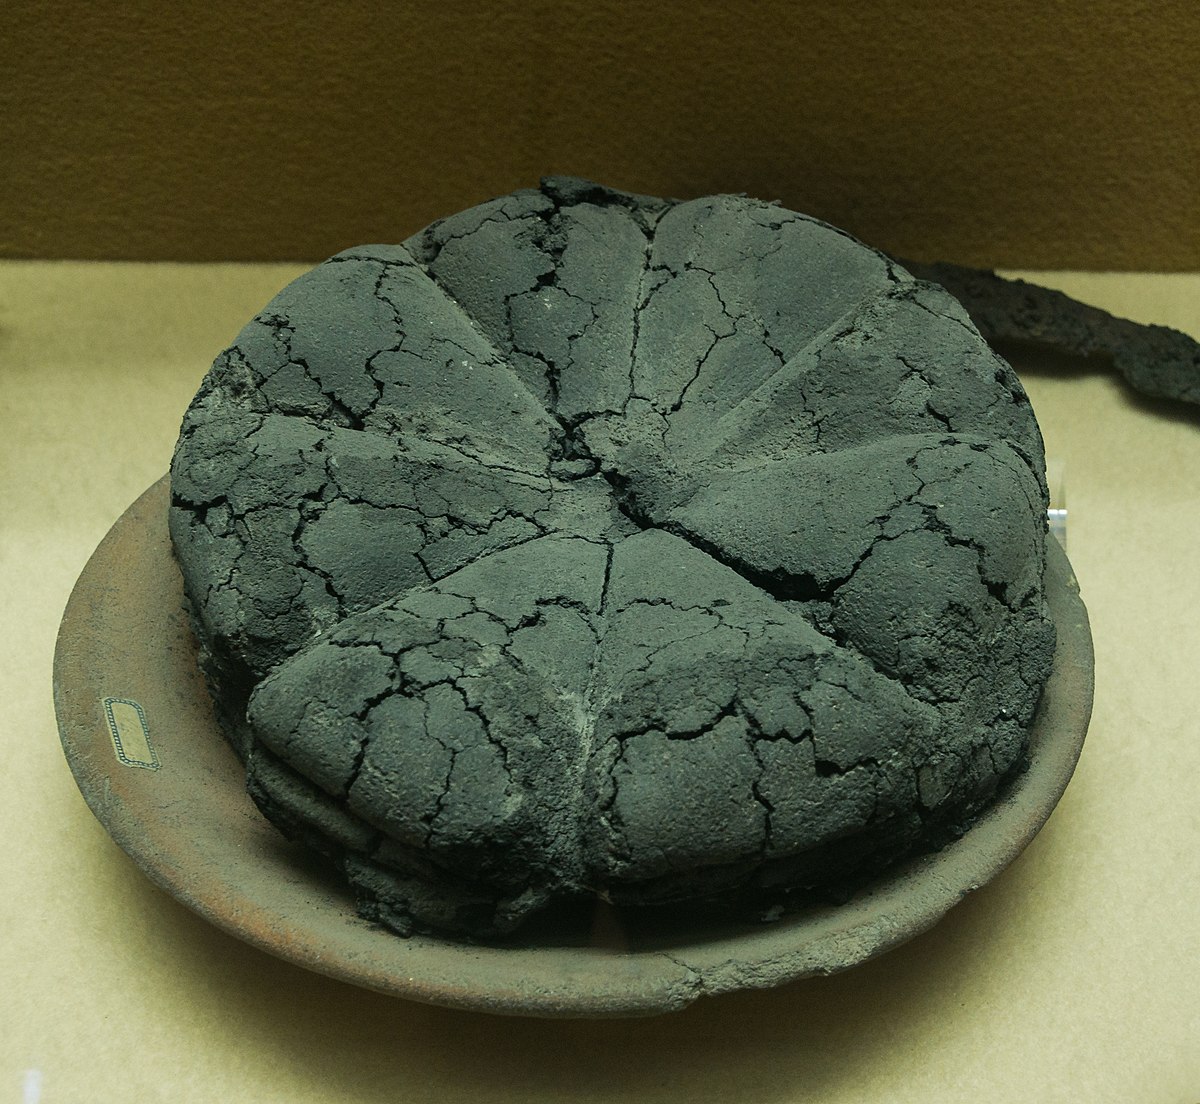 2,000-Year-Old Ancient Roman Bread Abandoned And Preserved In An Oven Of Pompeii